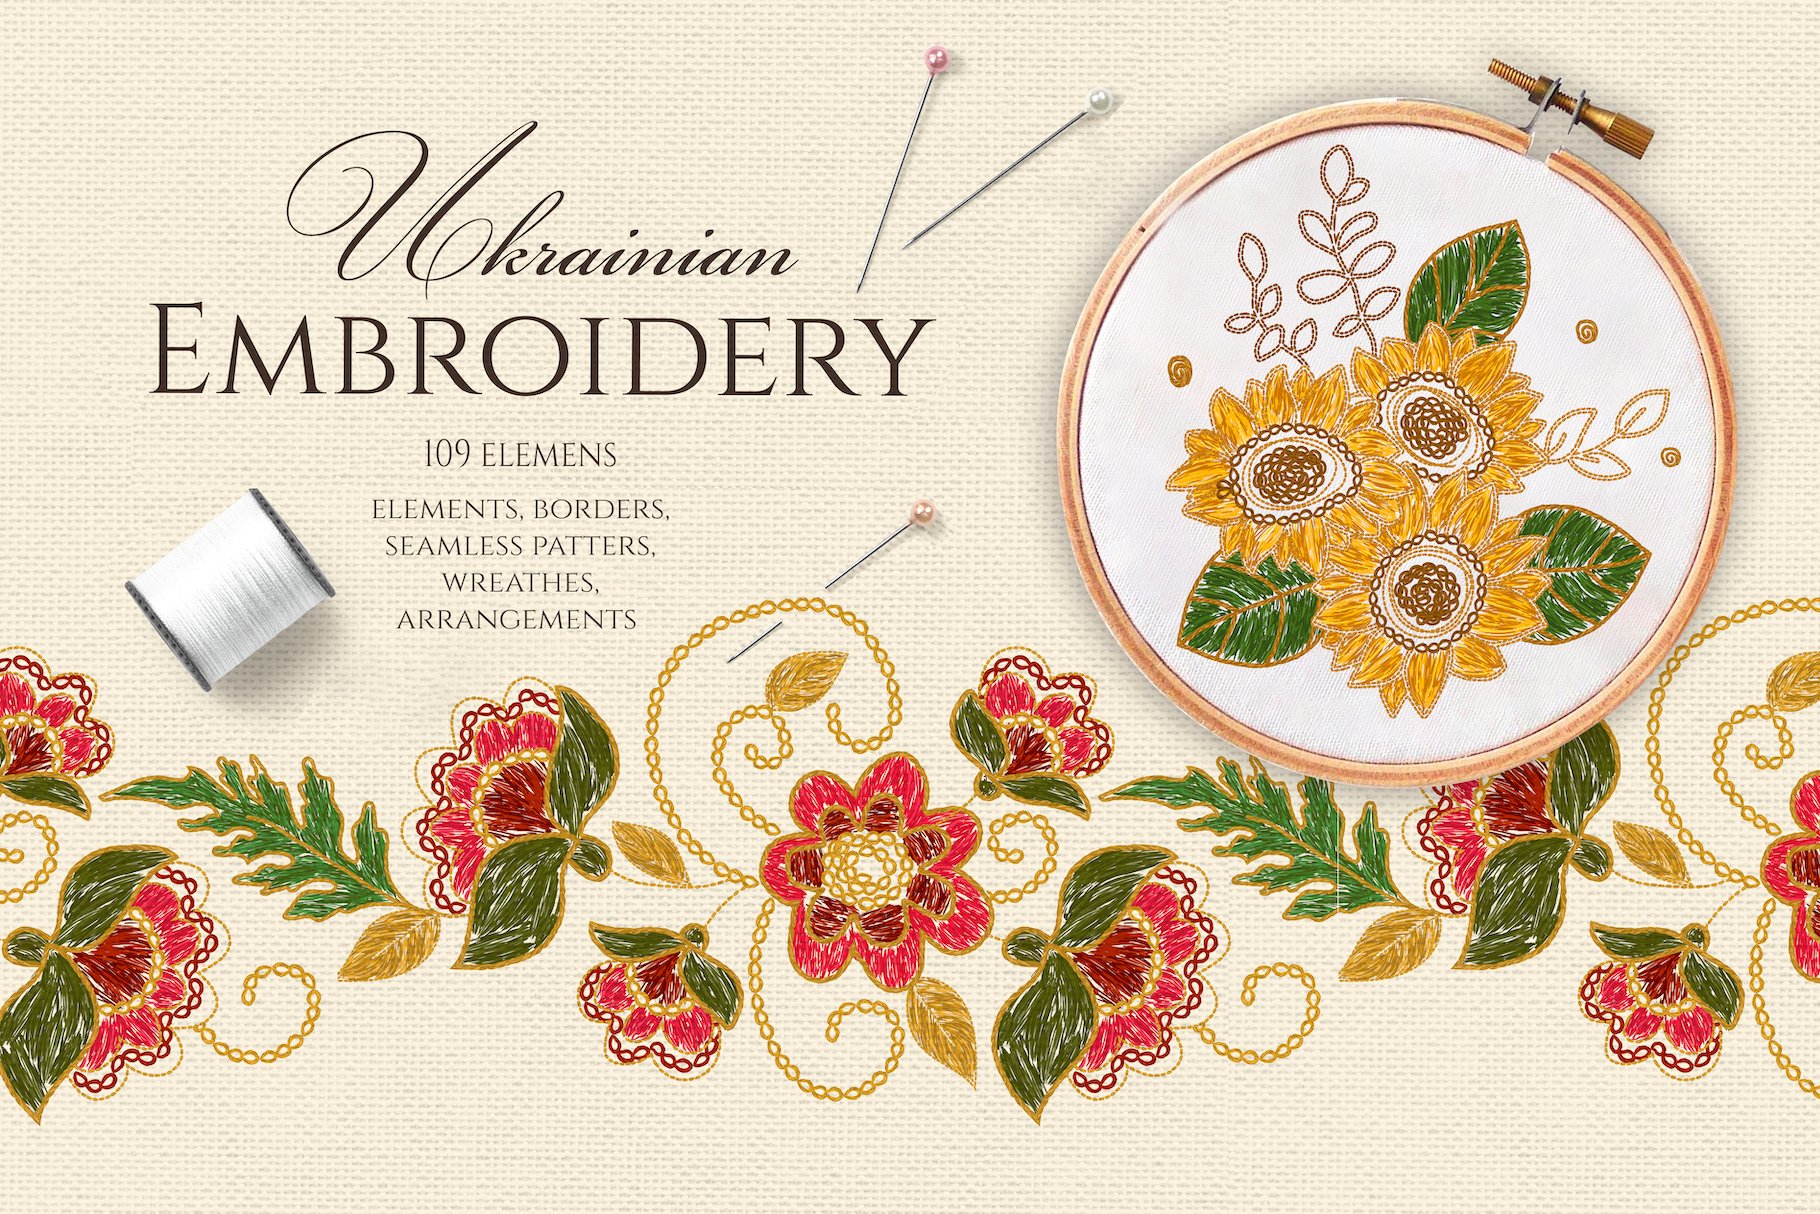 Ukrainian Embroidery Flowers cover image.